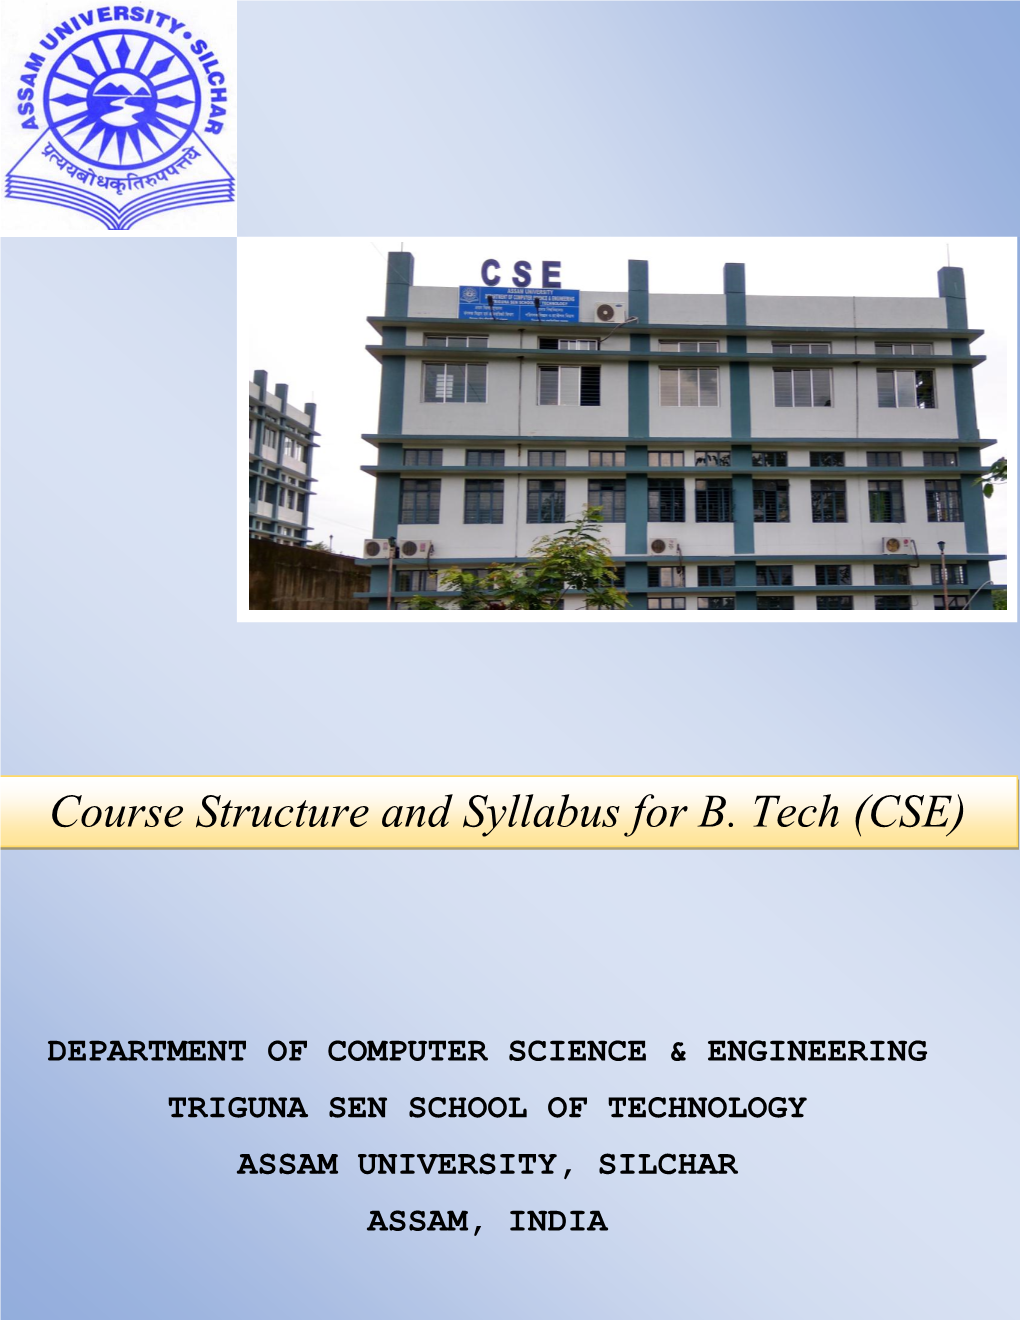 Course Structure and Syllabus for B.Tech(CSE)